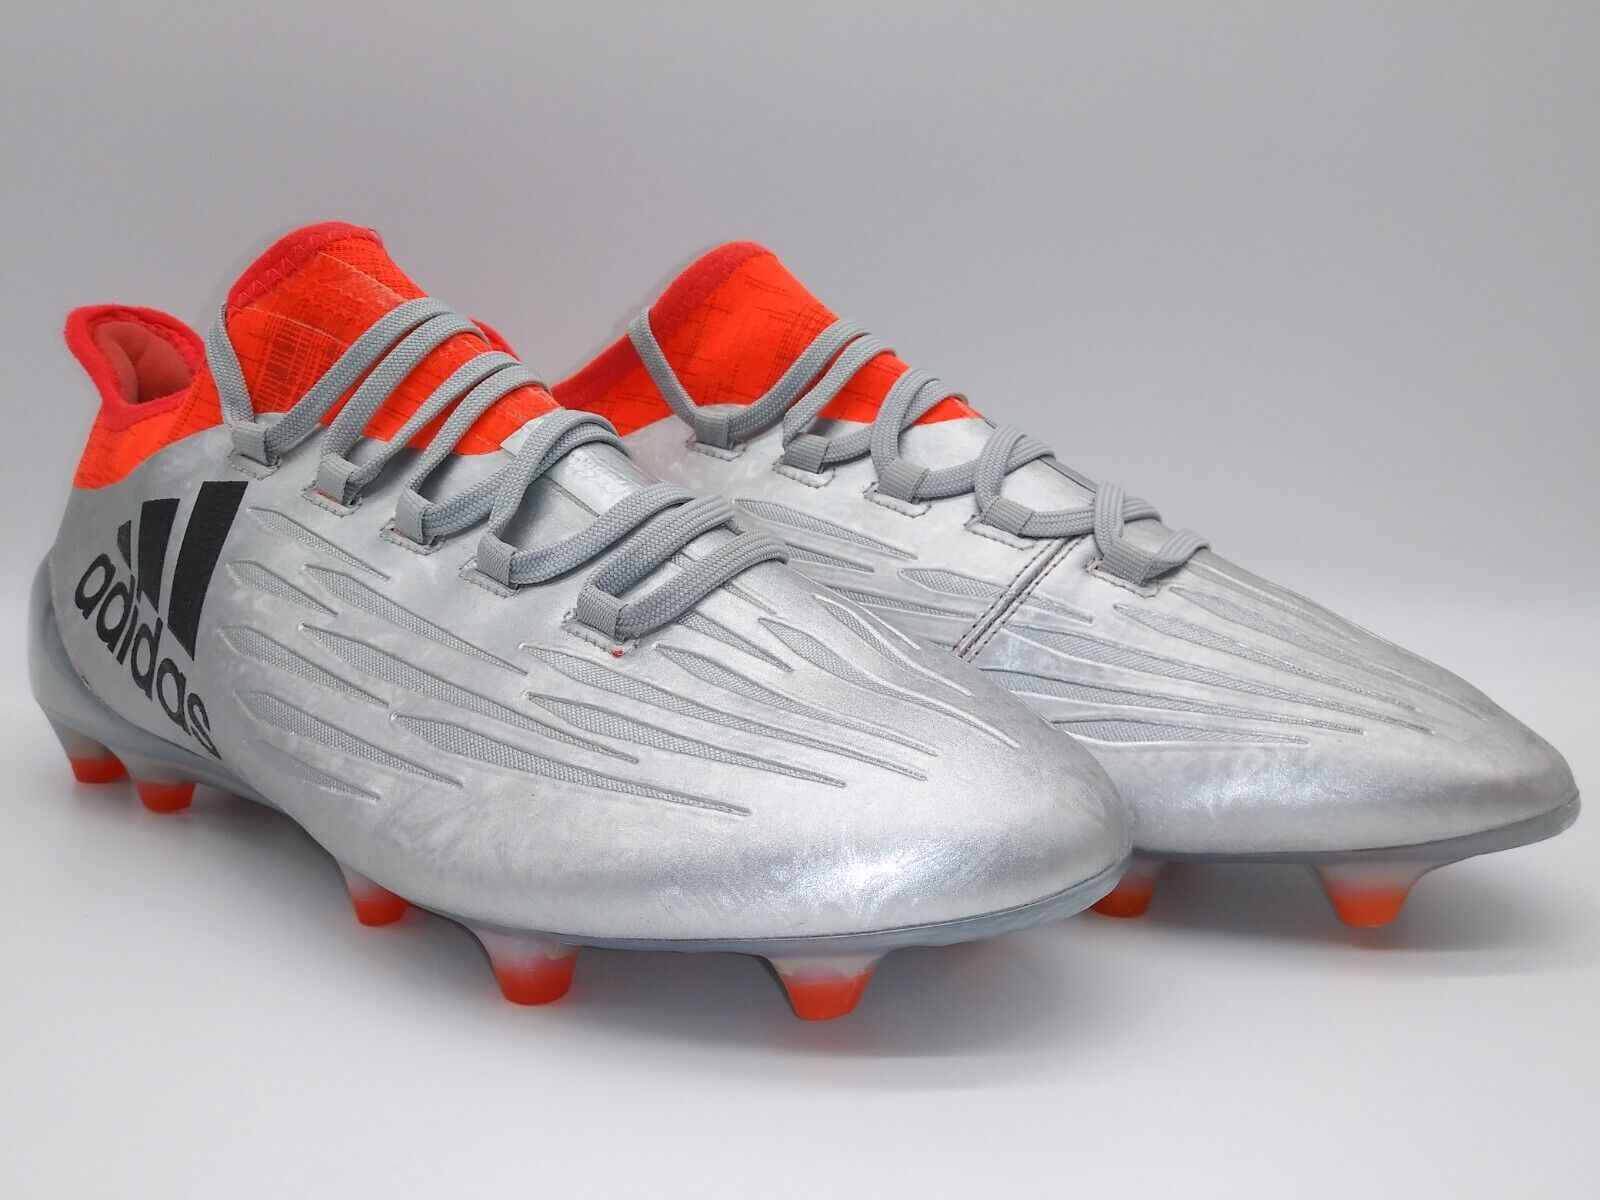 Adidas Mens Rare X 16.1 FG Cleats S81939 Silver and Orange Soccer Cleats